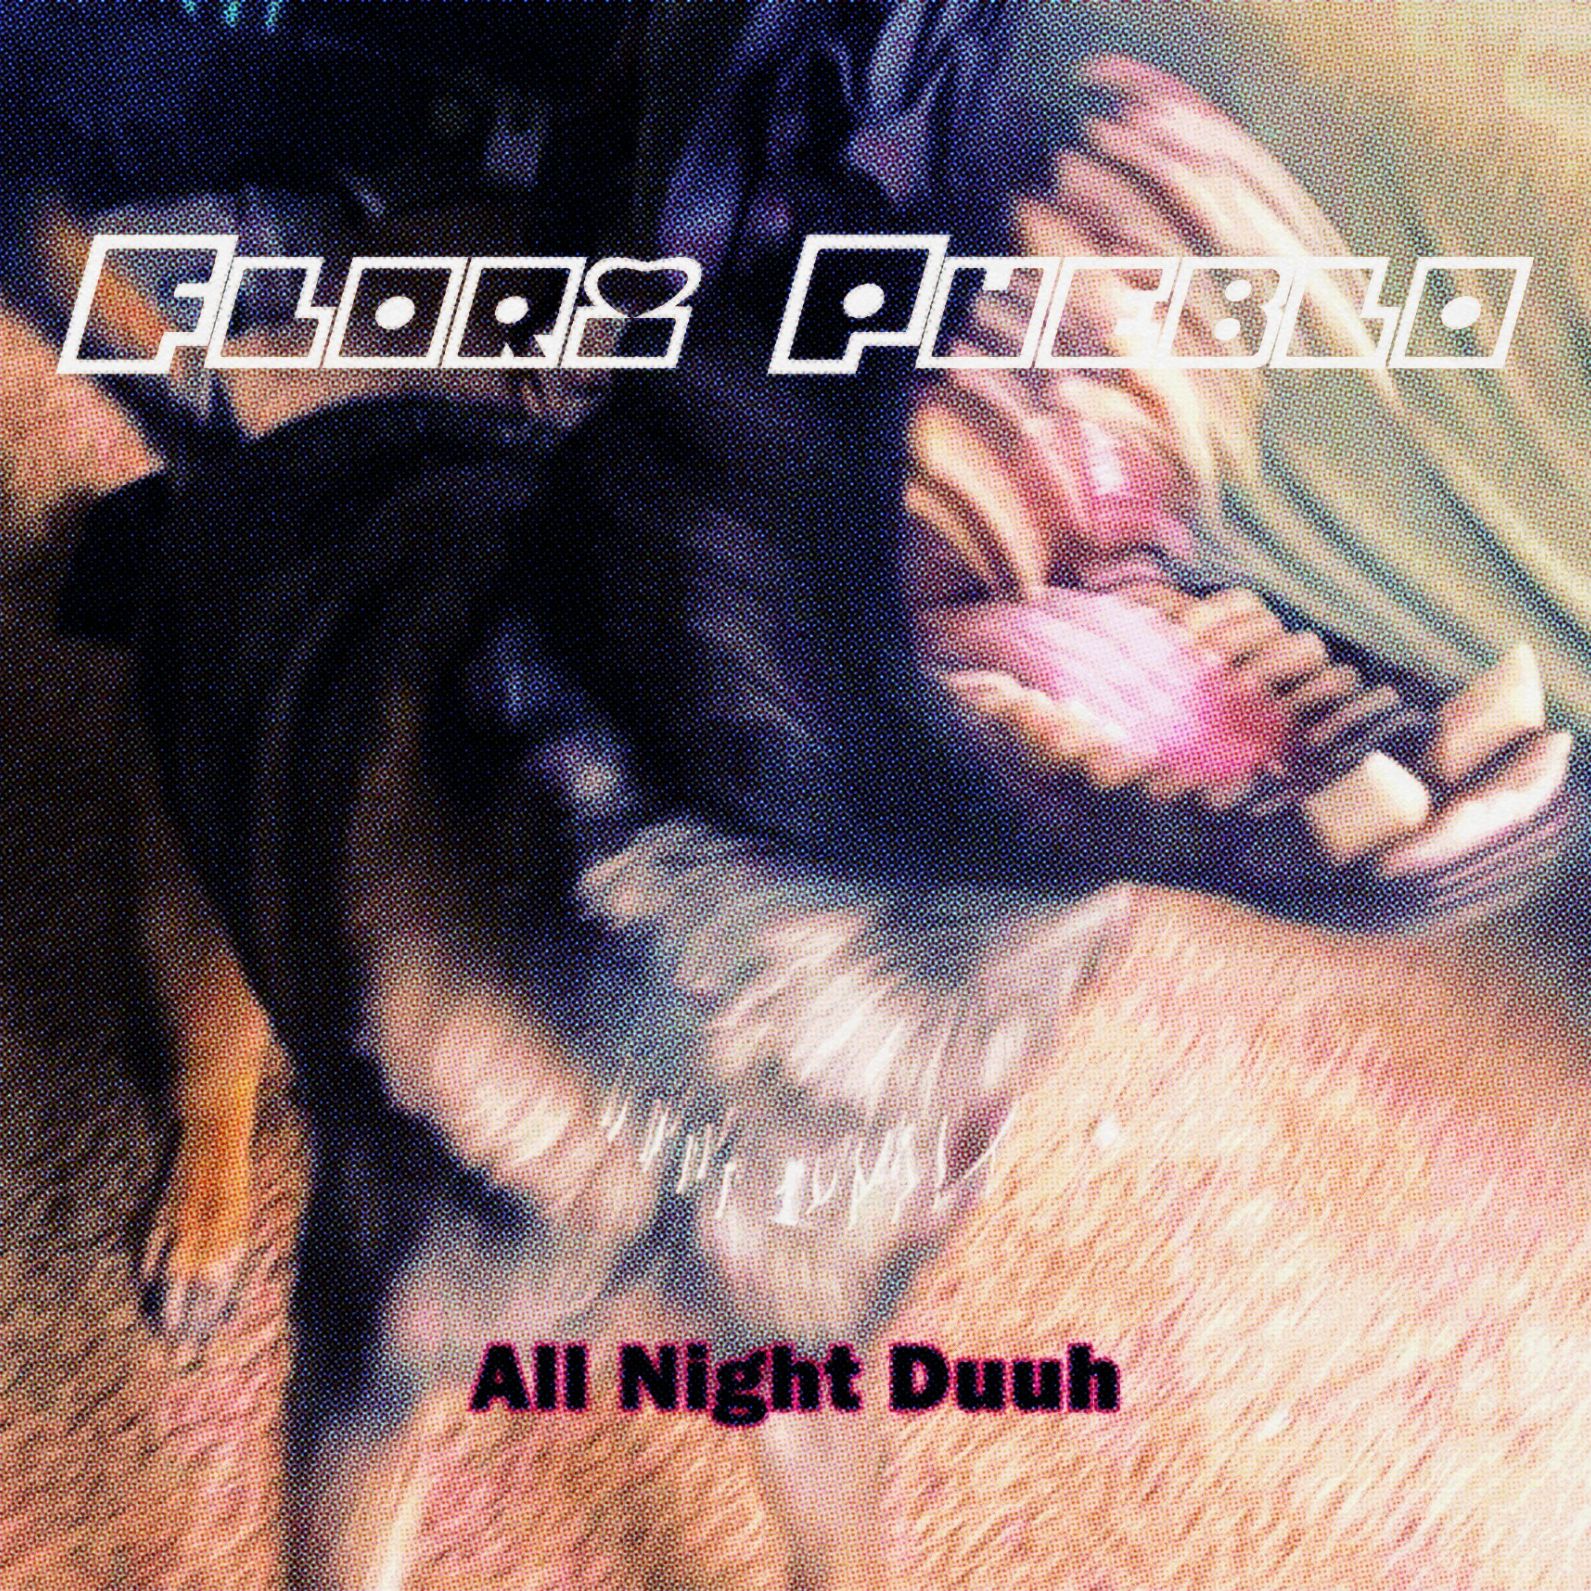 Download All Night Duuh (Free DL)